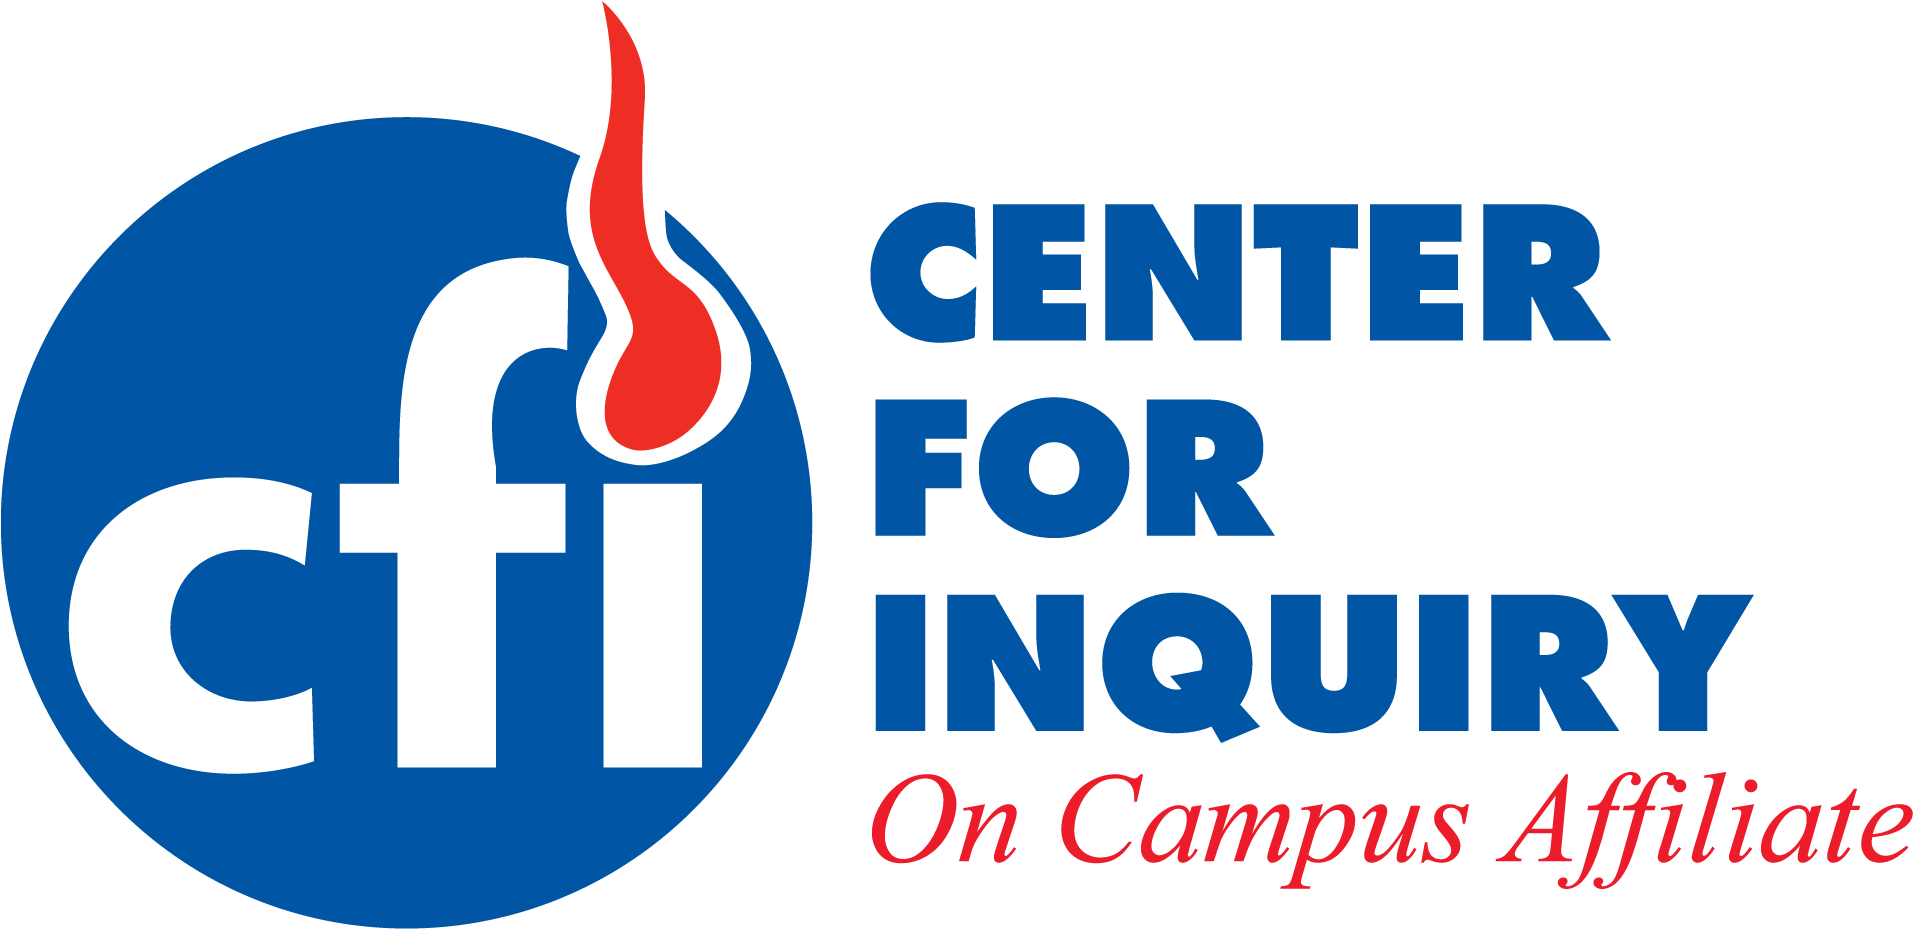 Cfi On Campus Resources - Center For Inquiry (2000x1000), Png Download